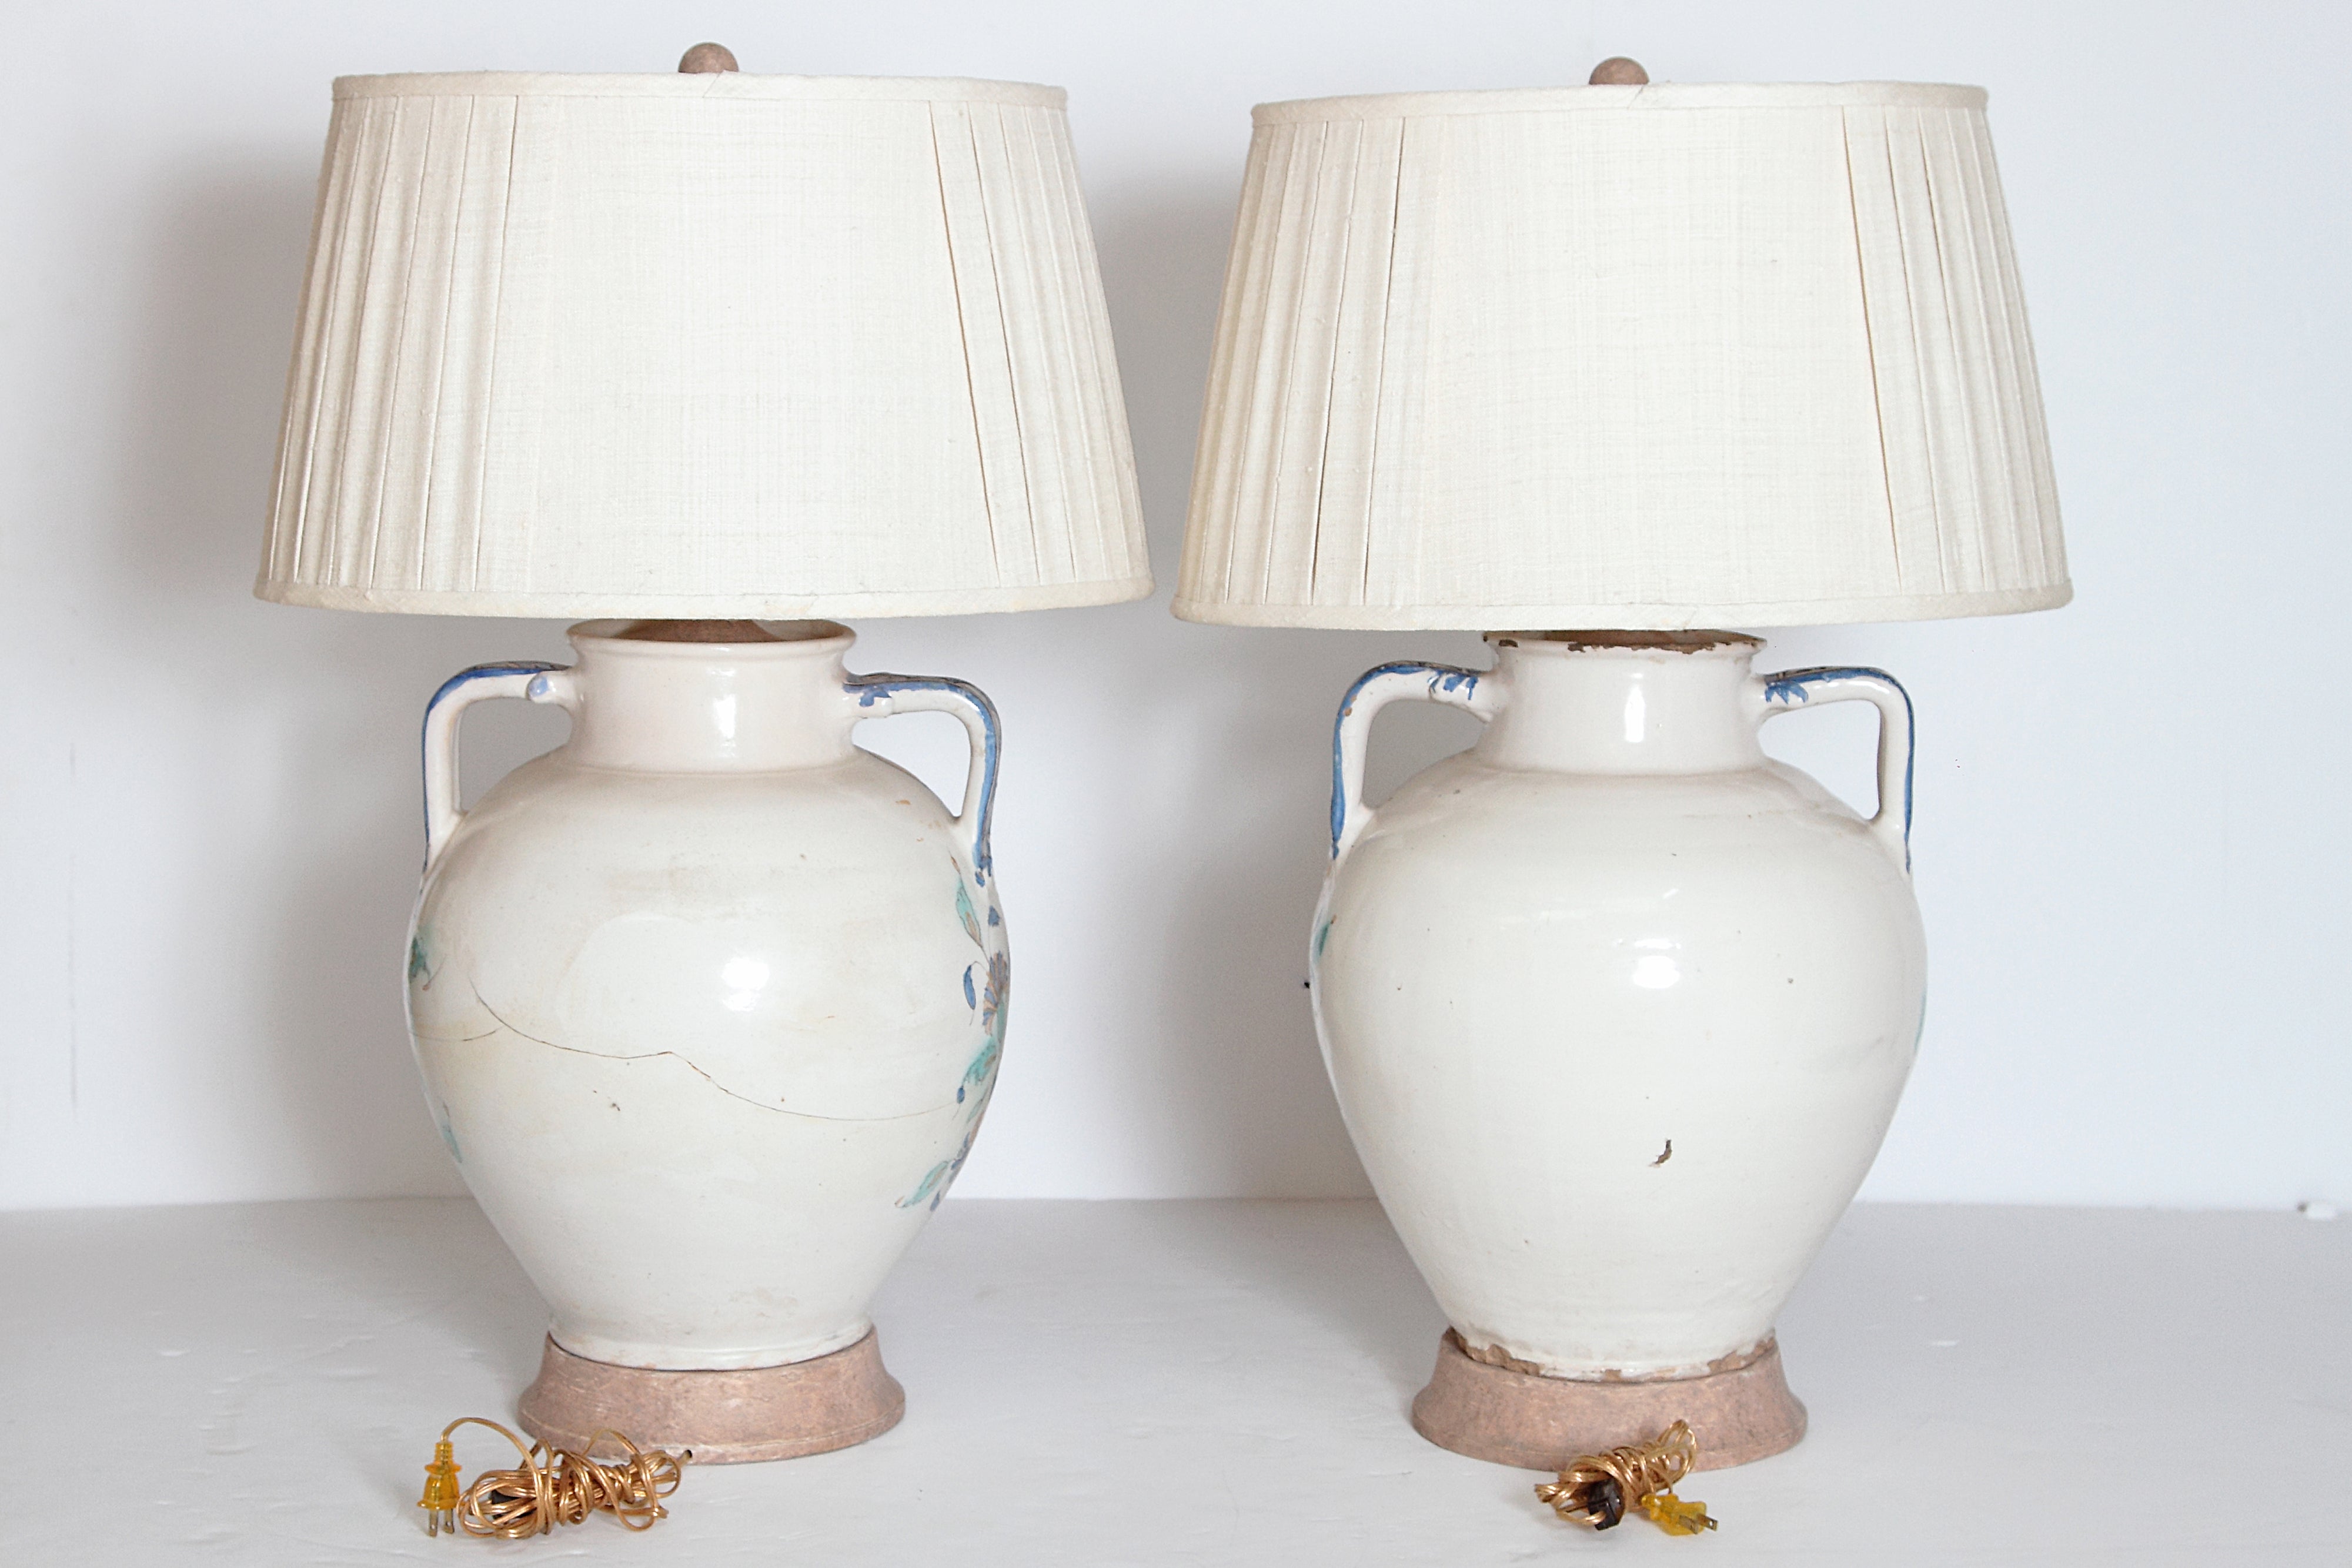 A Pair of Large 17th Century Italian Majolica Vases as Lamps